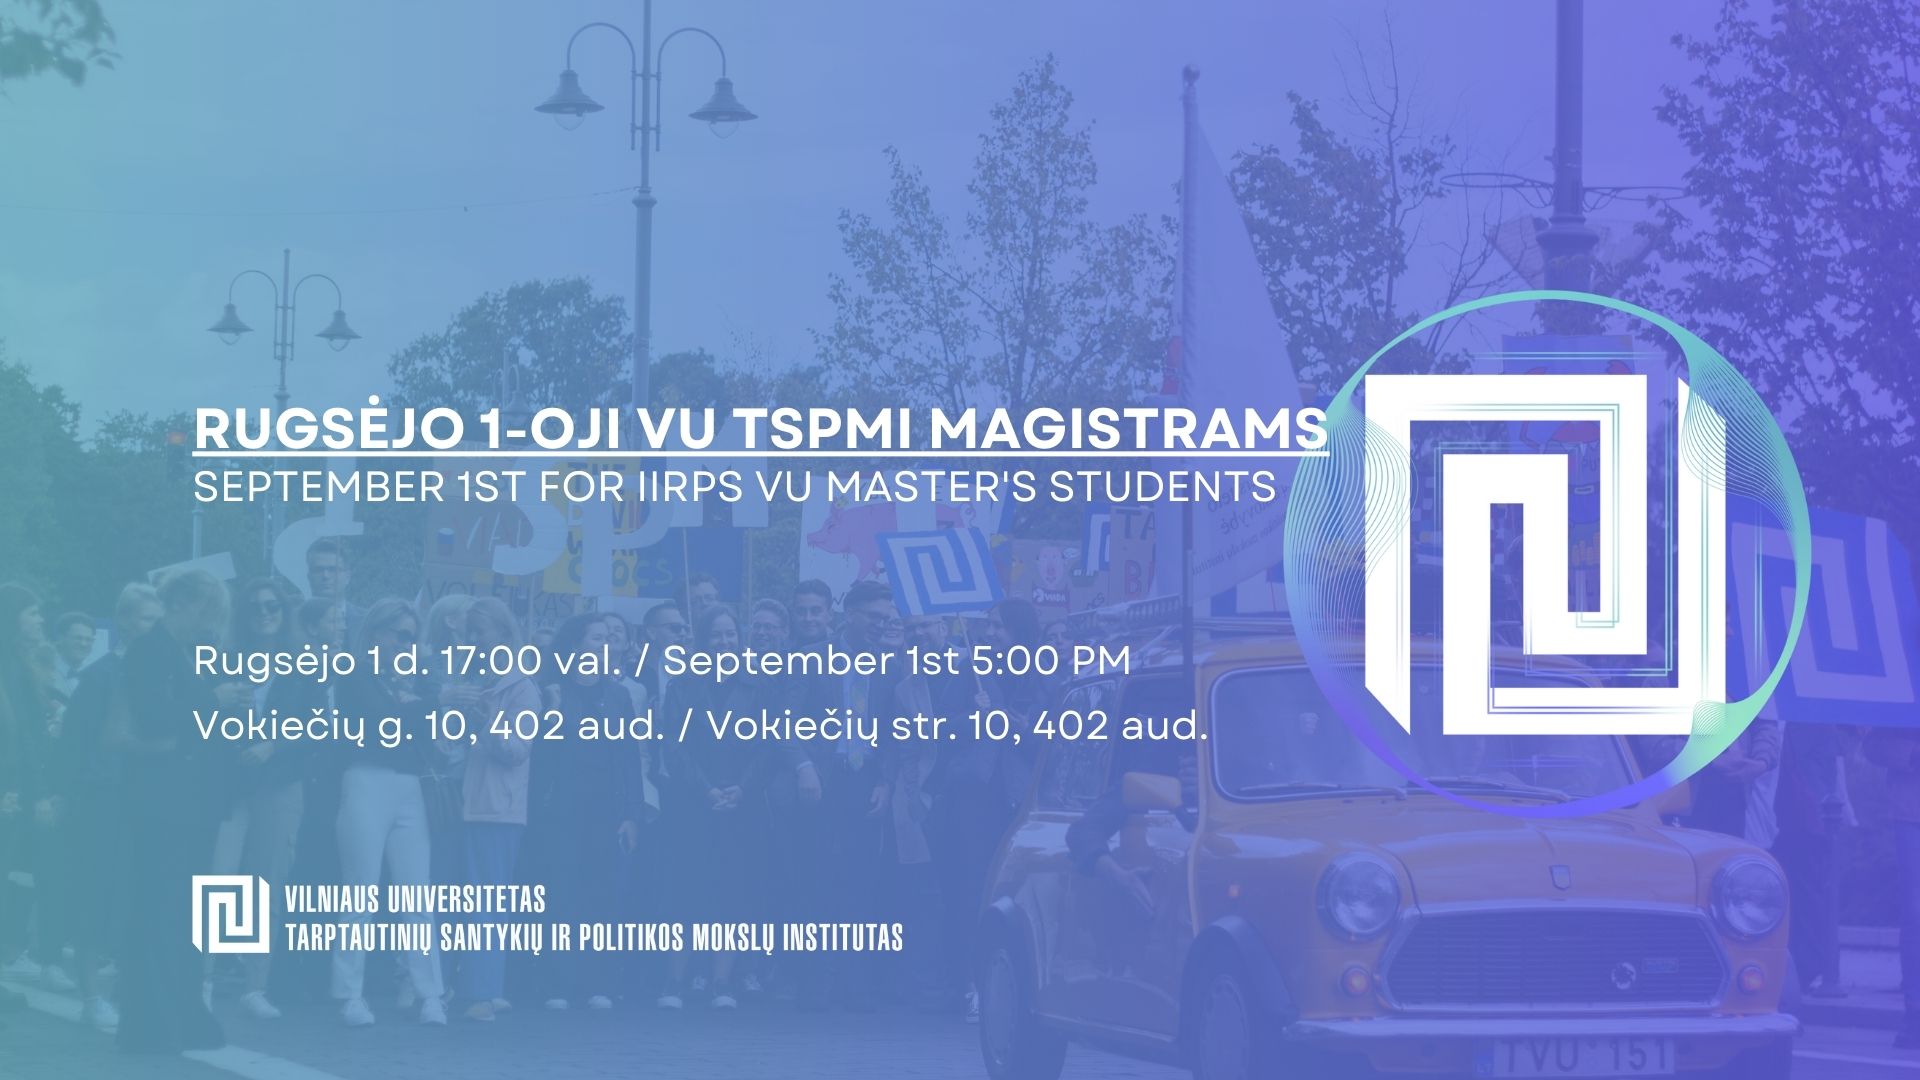 September 1st For IIRPS VU Master’s Students